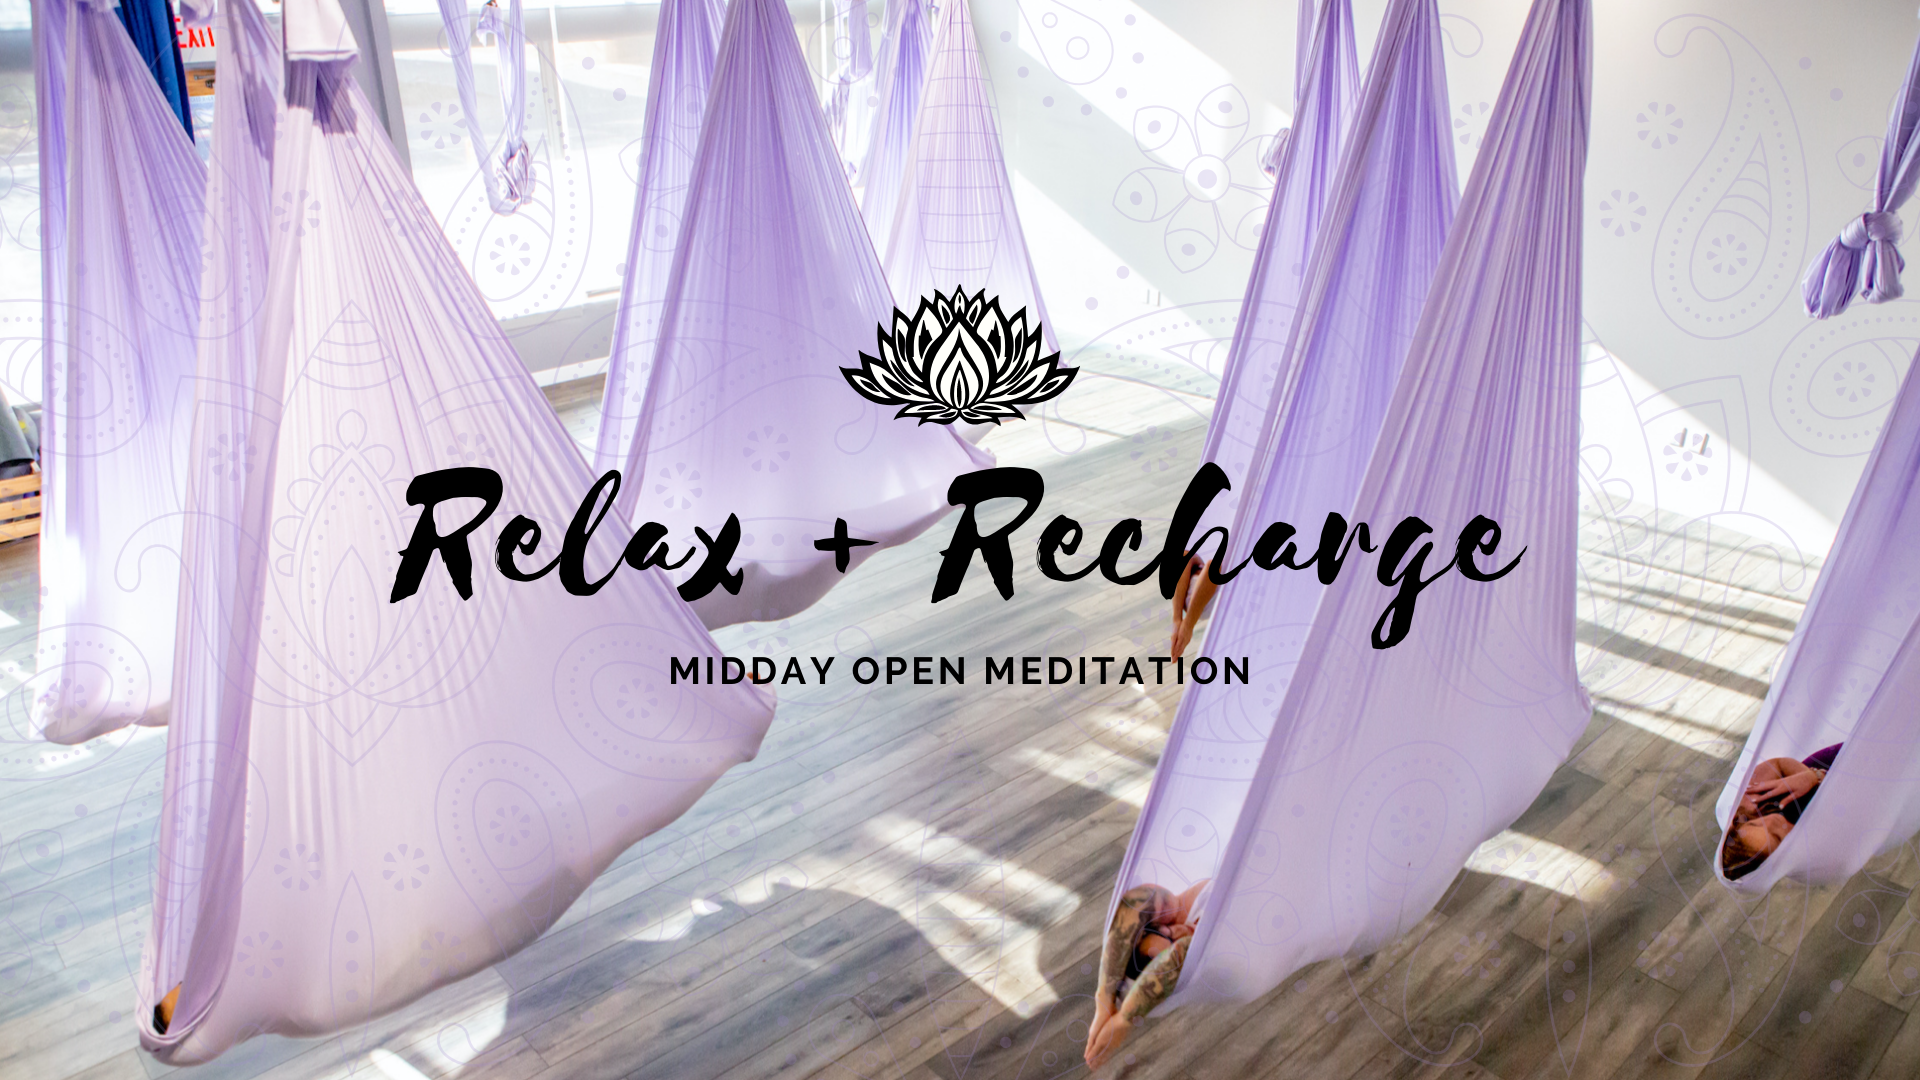 Relax + Recharge: Midday Open Meditation